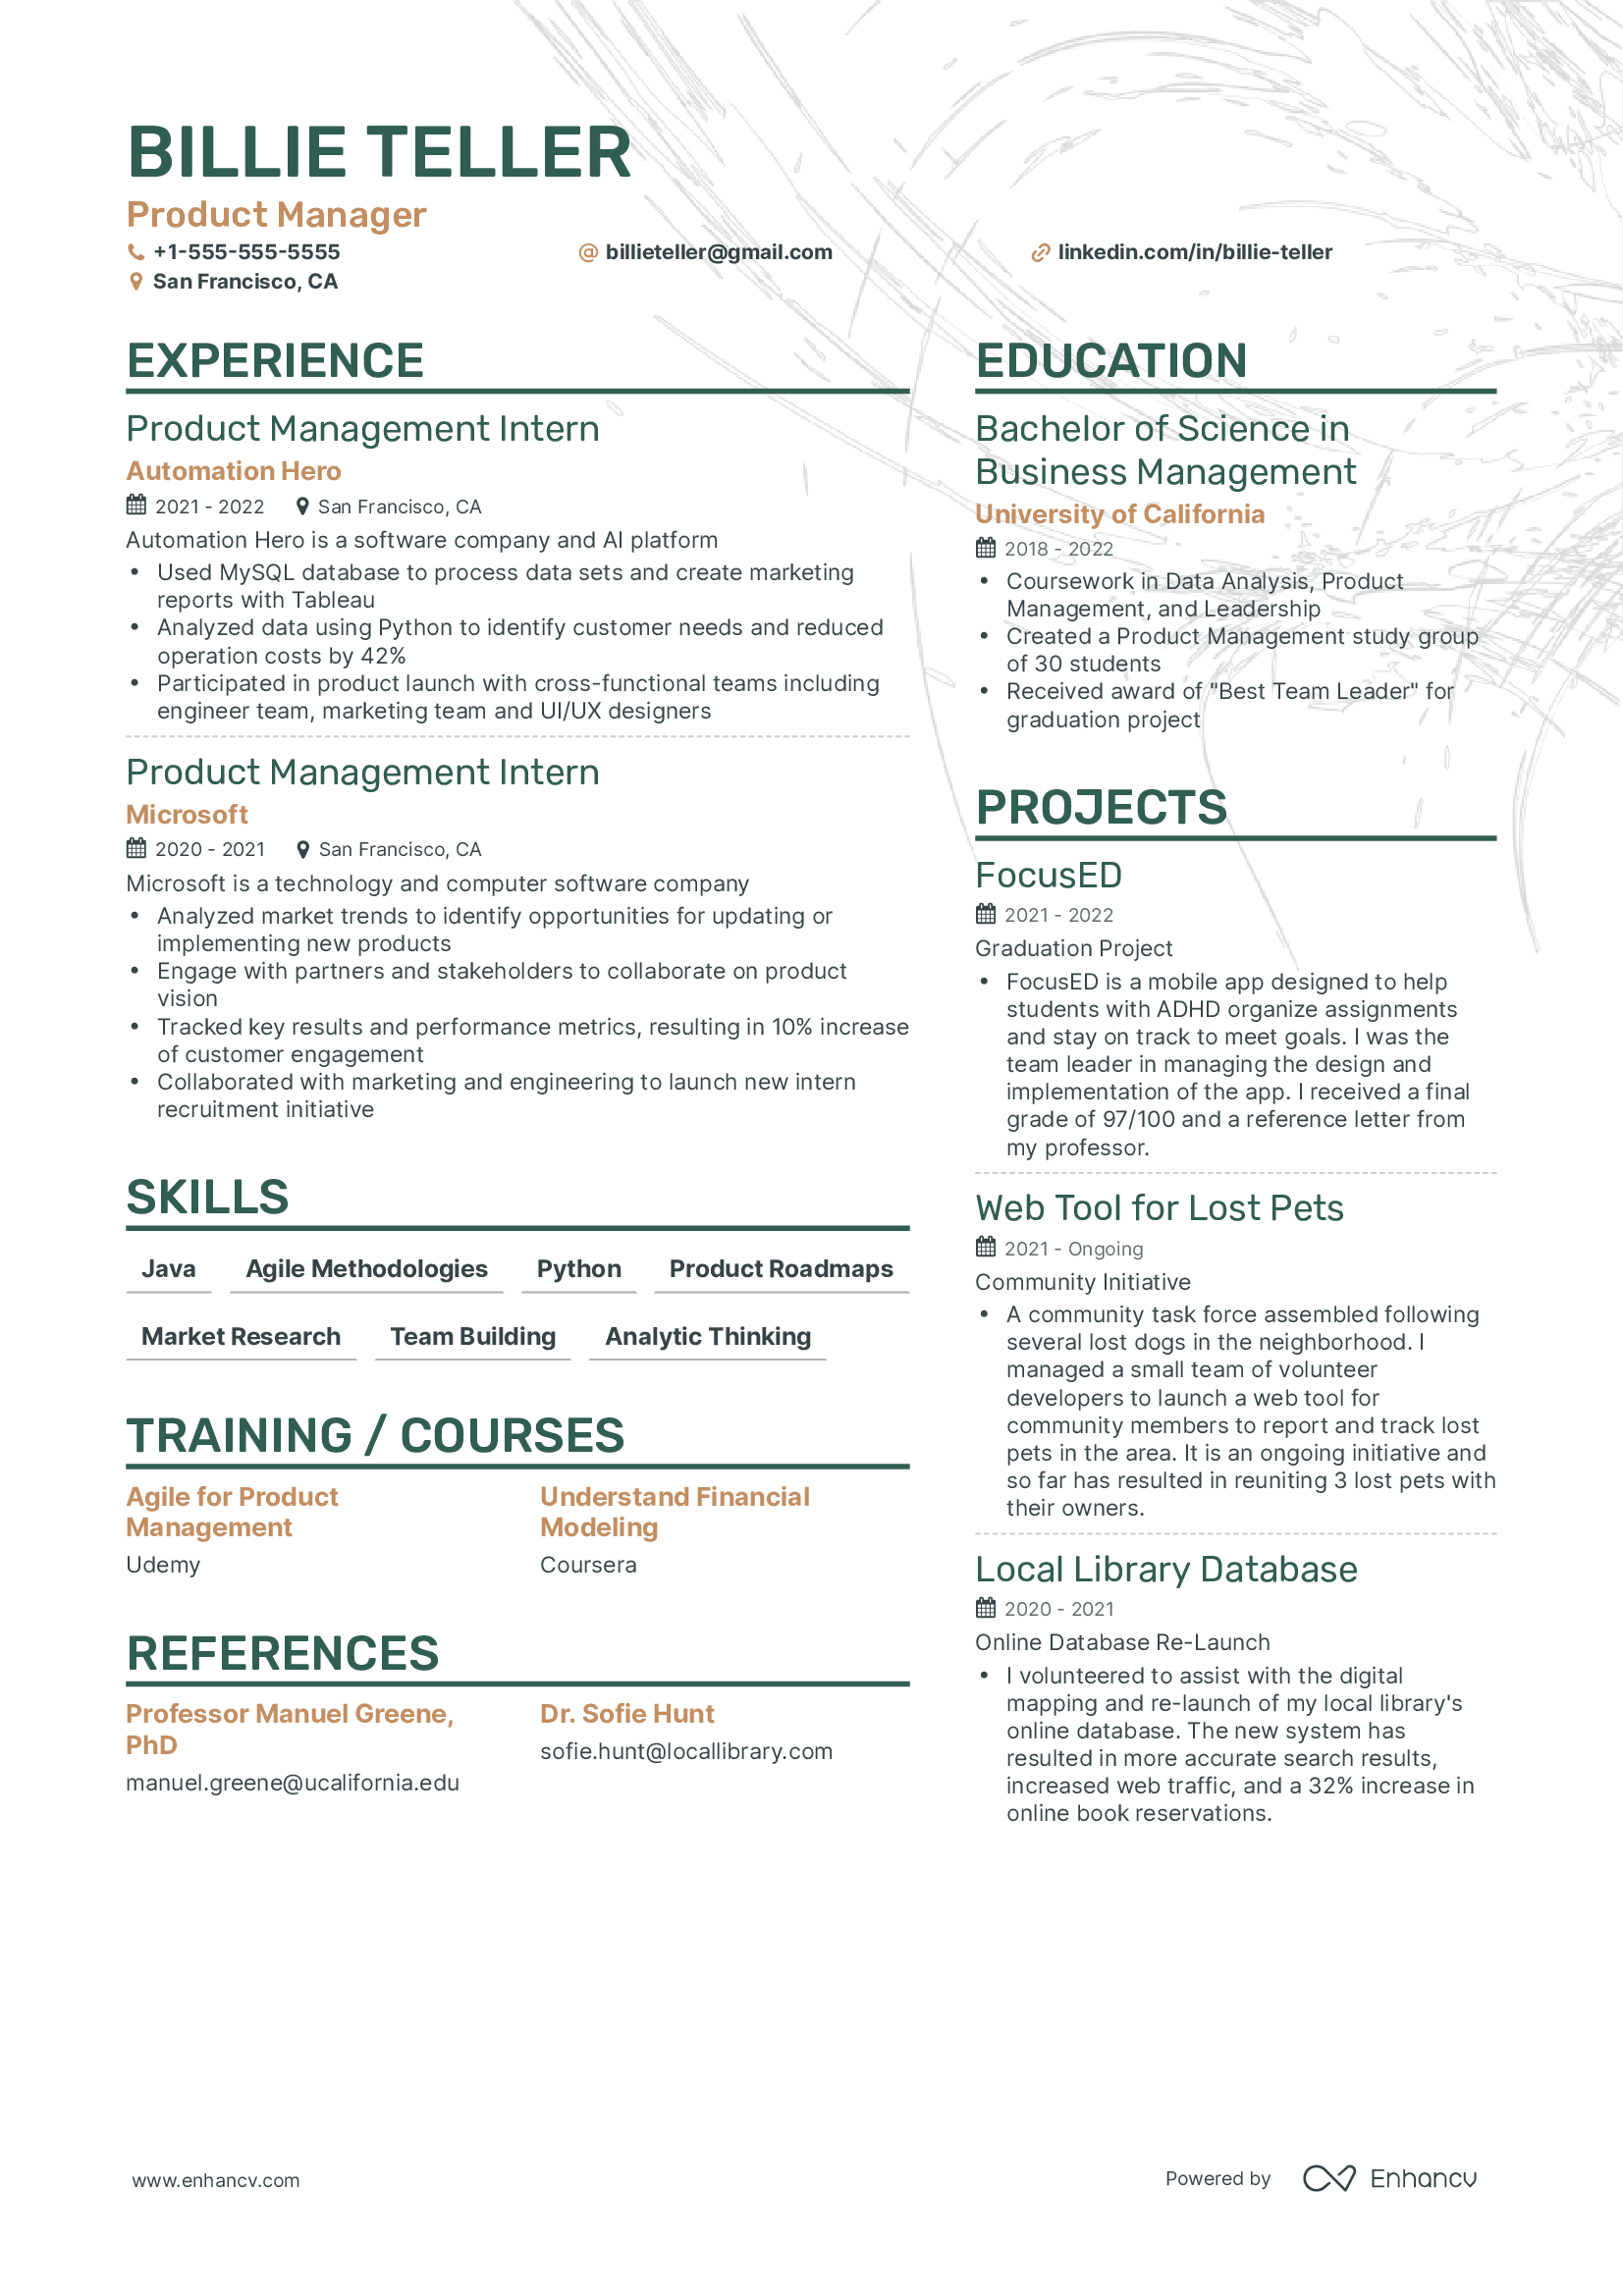 Entry Level Product Manager Resume.png